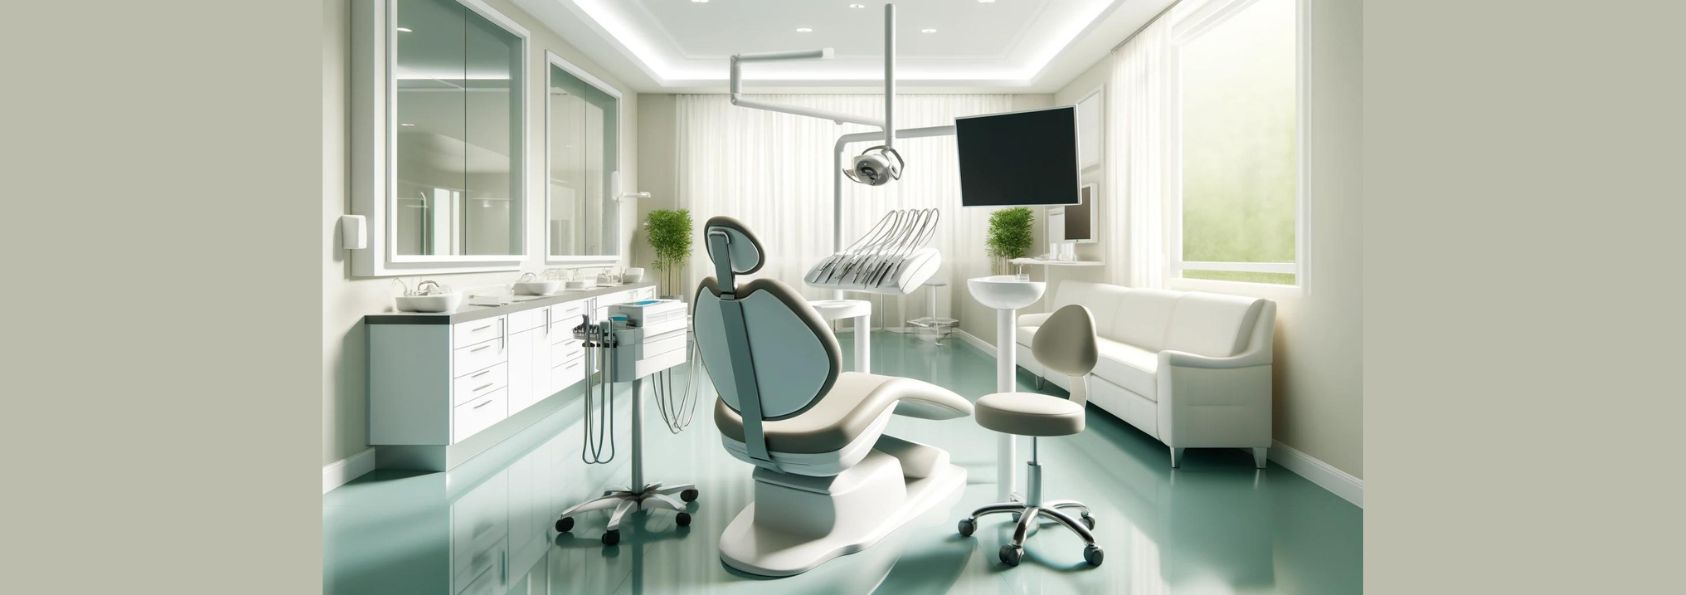 Why Dentists Want to Start Their Own Practice